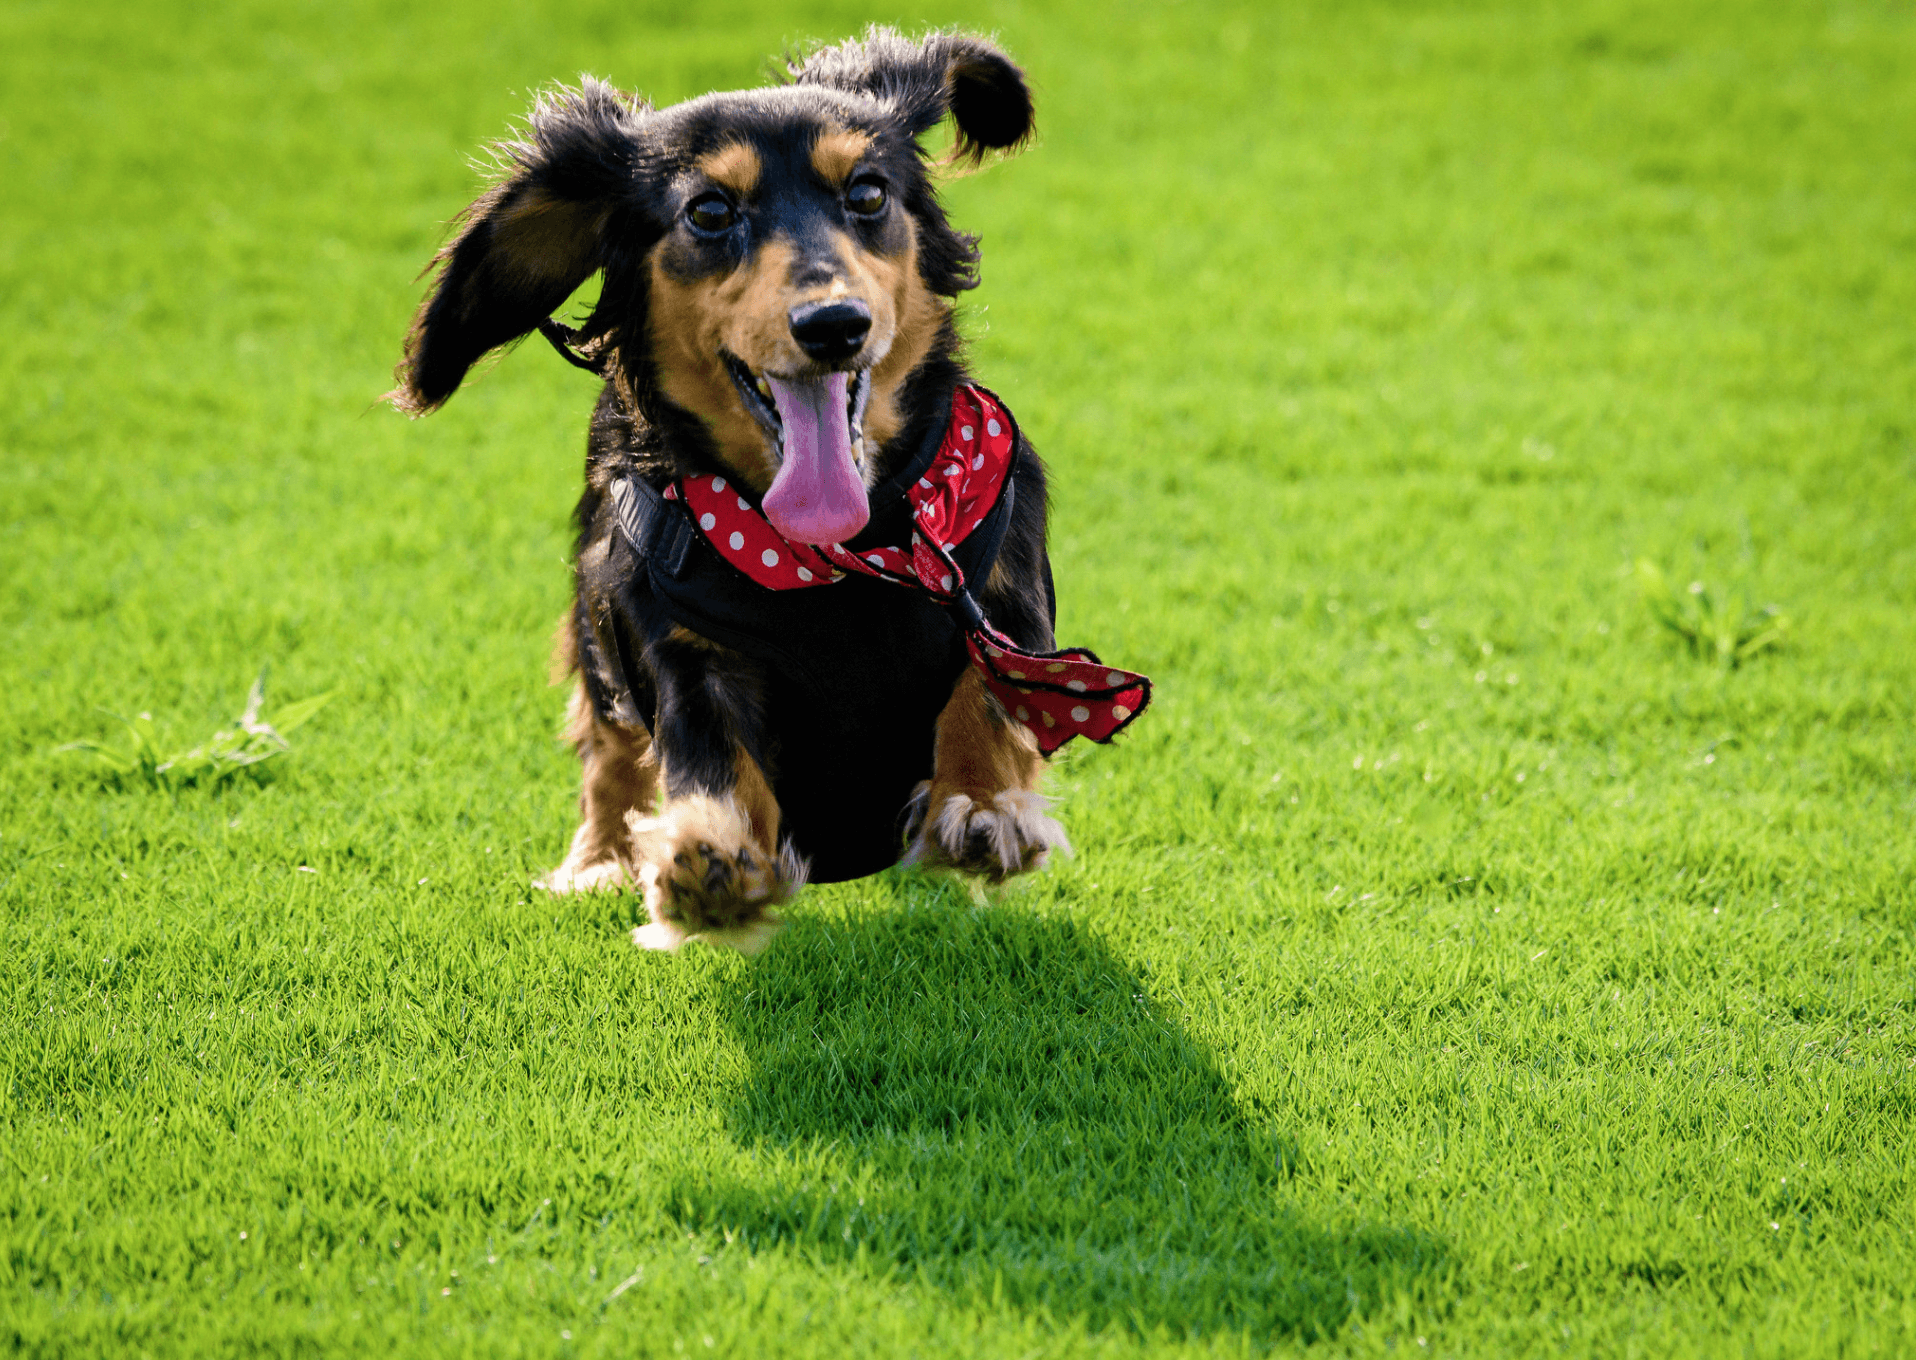 My dog can run and jump. Зеленая собака. Running Dog. A Dog Running on the grass. Long haired Dachshund.